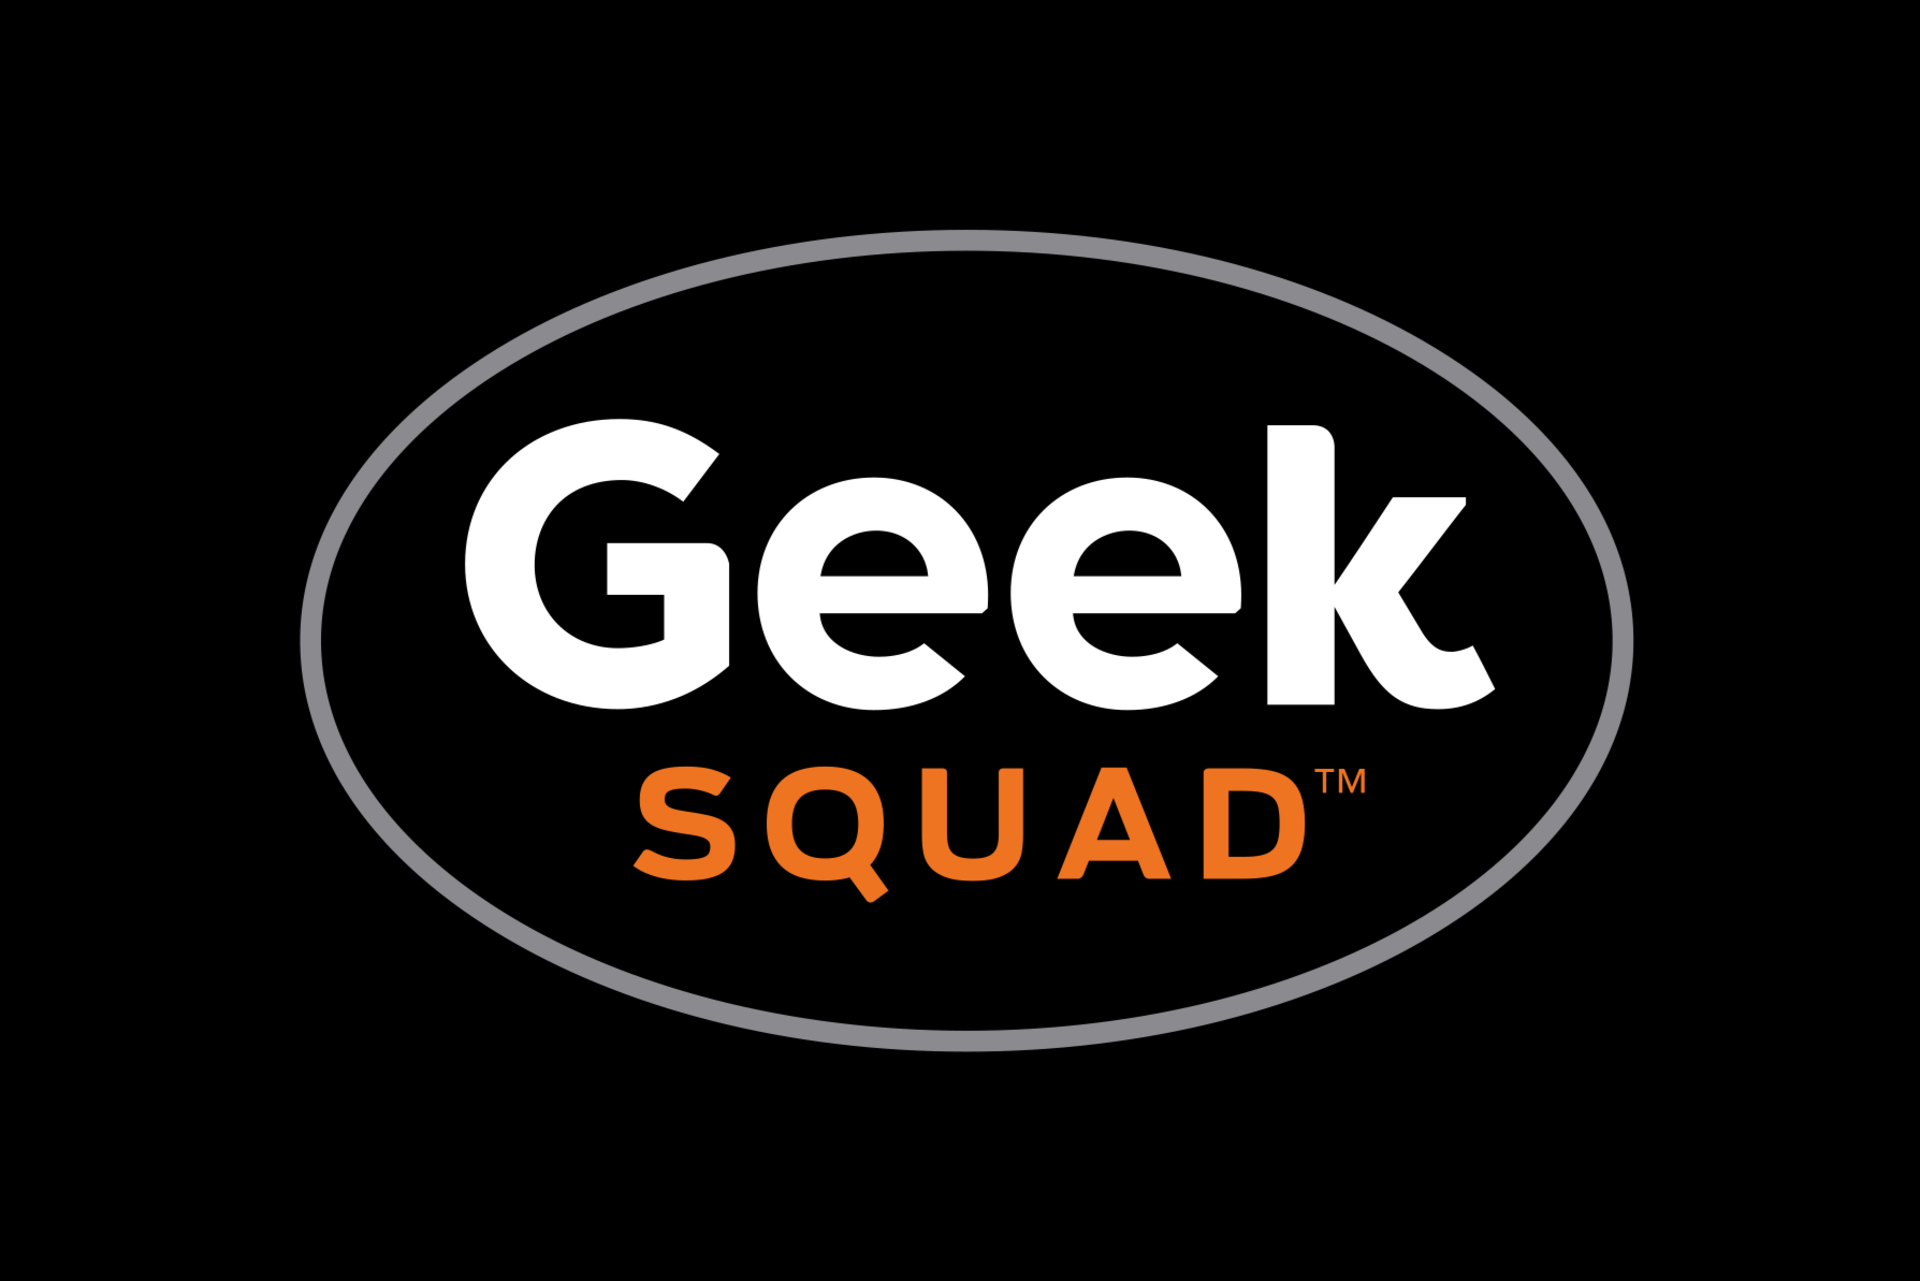 Spot a geek squad scam email